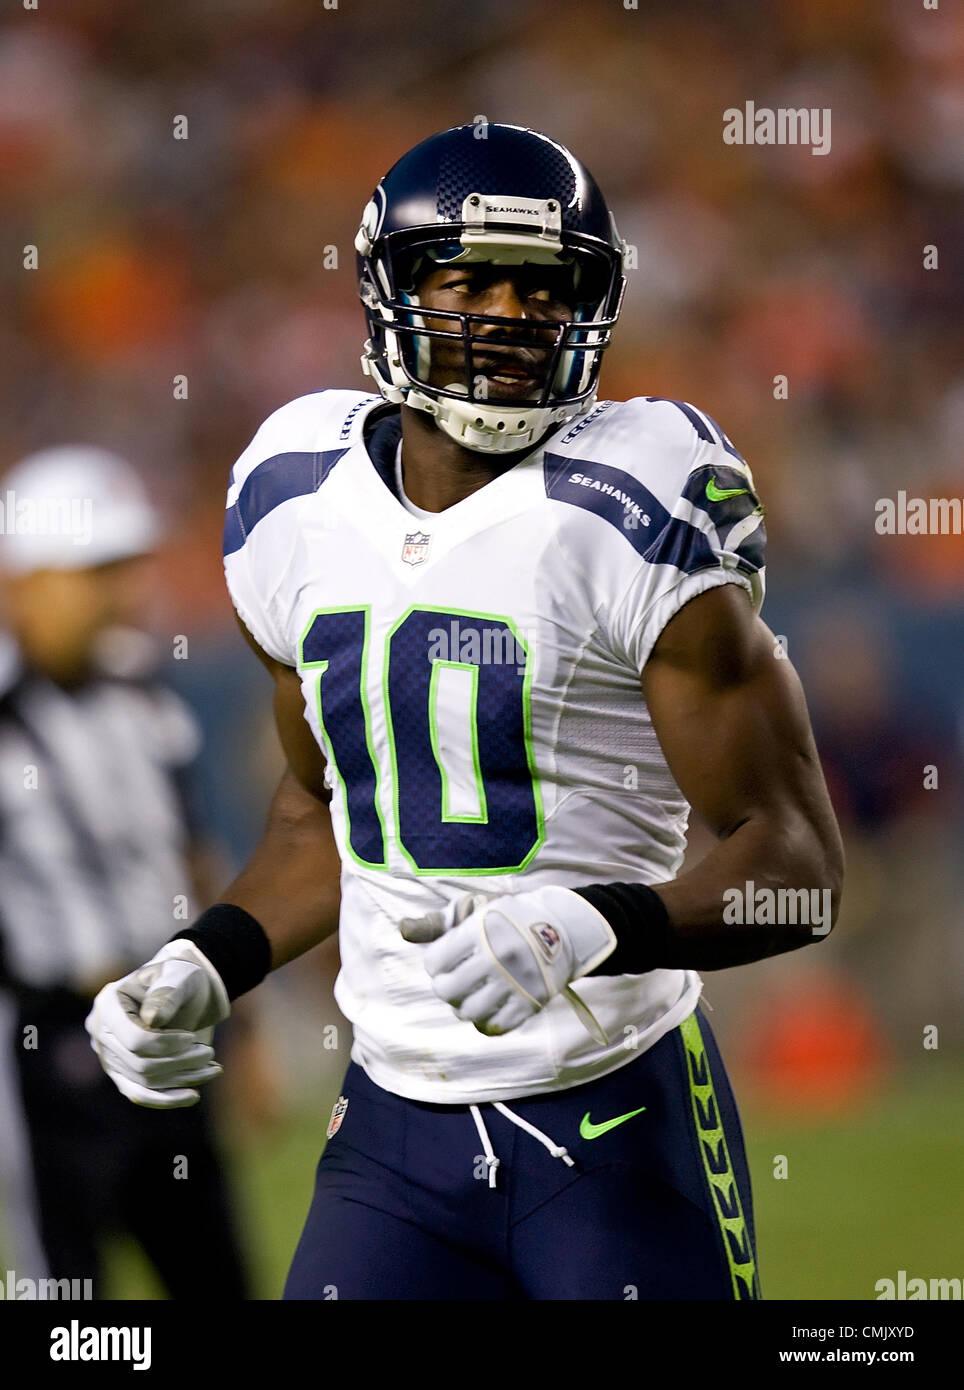 Terrell Owens Back in the NFL with the Seattle Seahawks